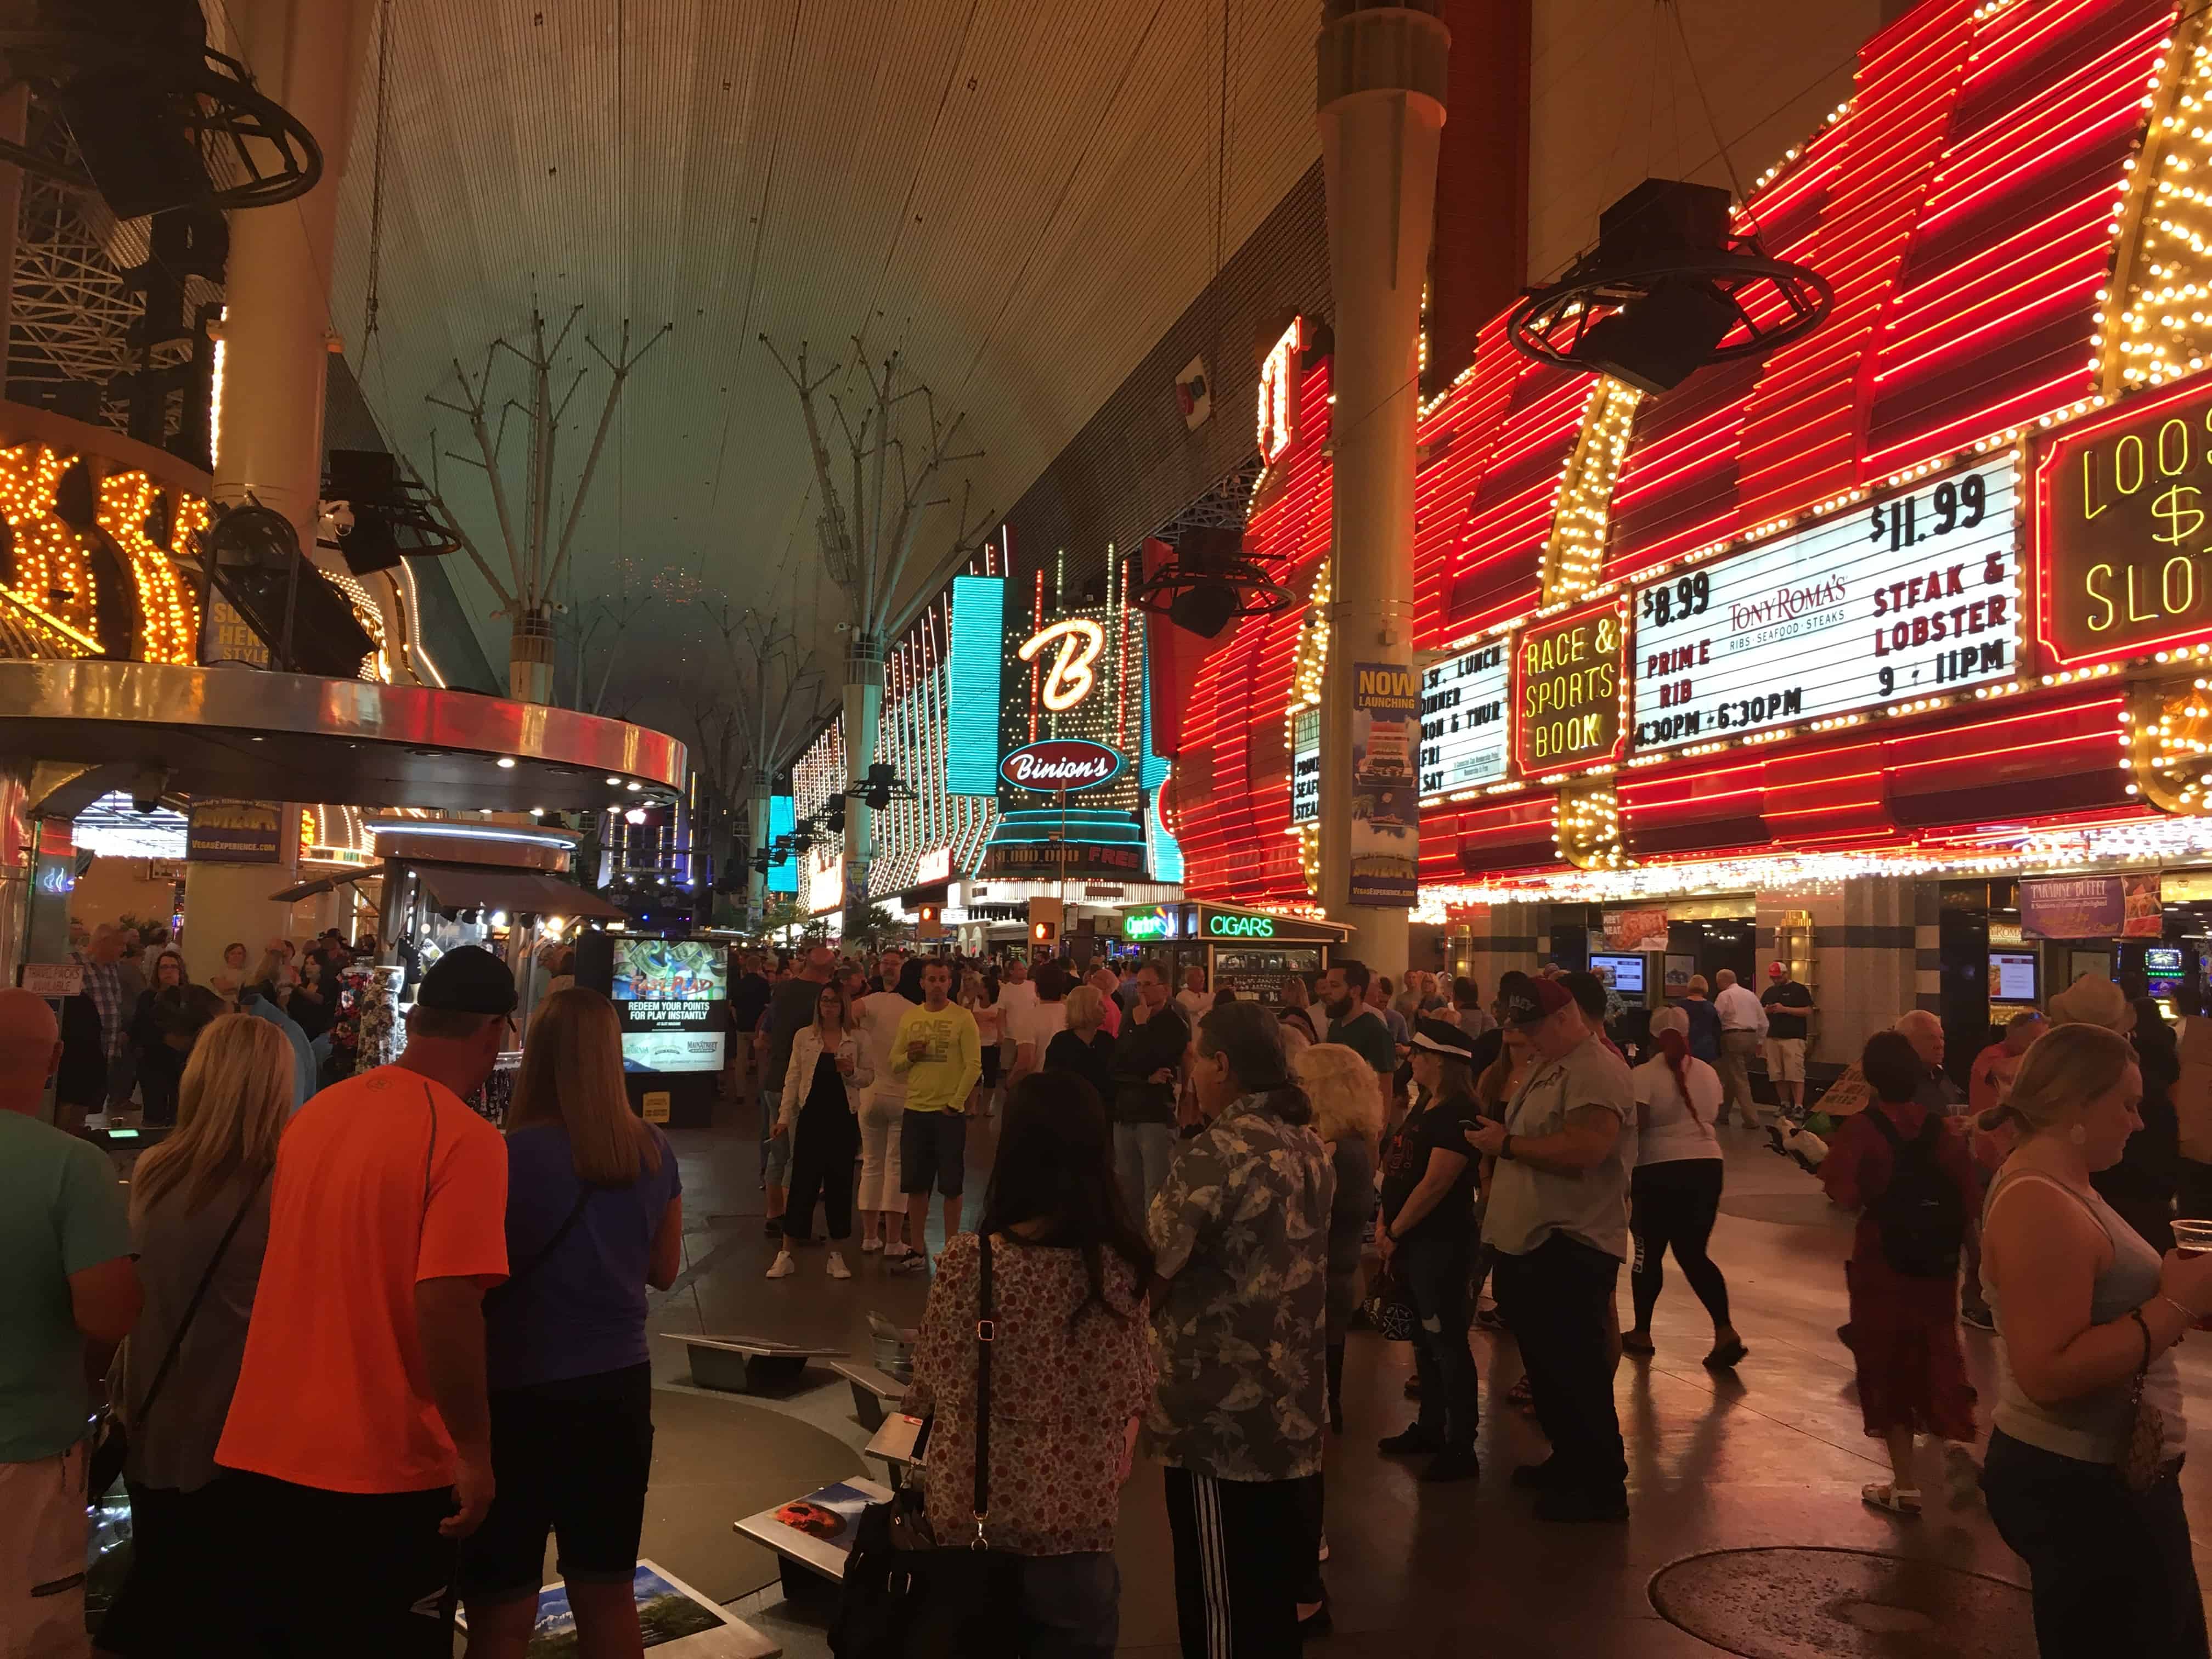 Visitors walking along the street at the Fremont Street Experience in Las Vegas, Nevada